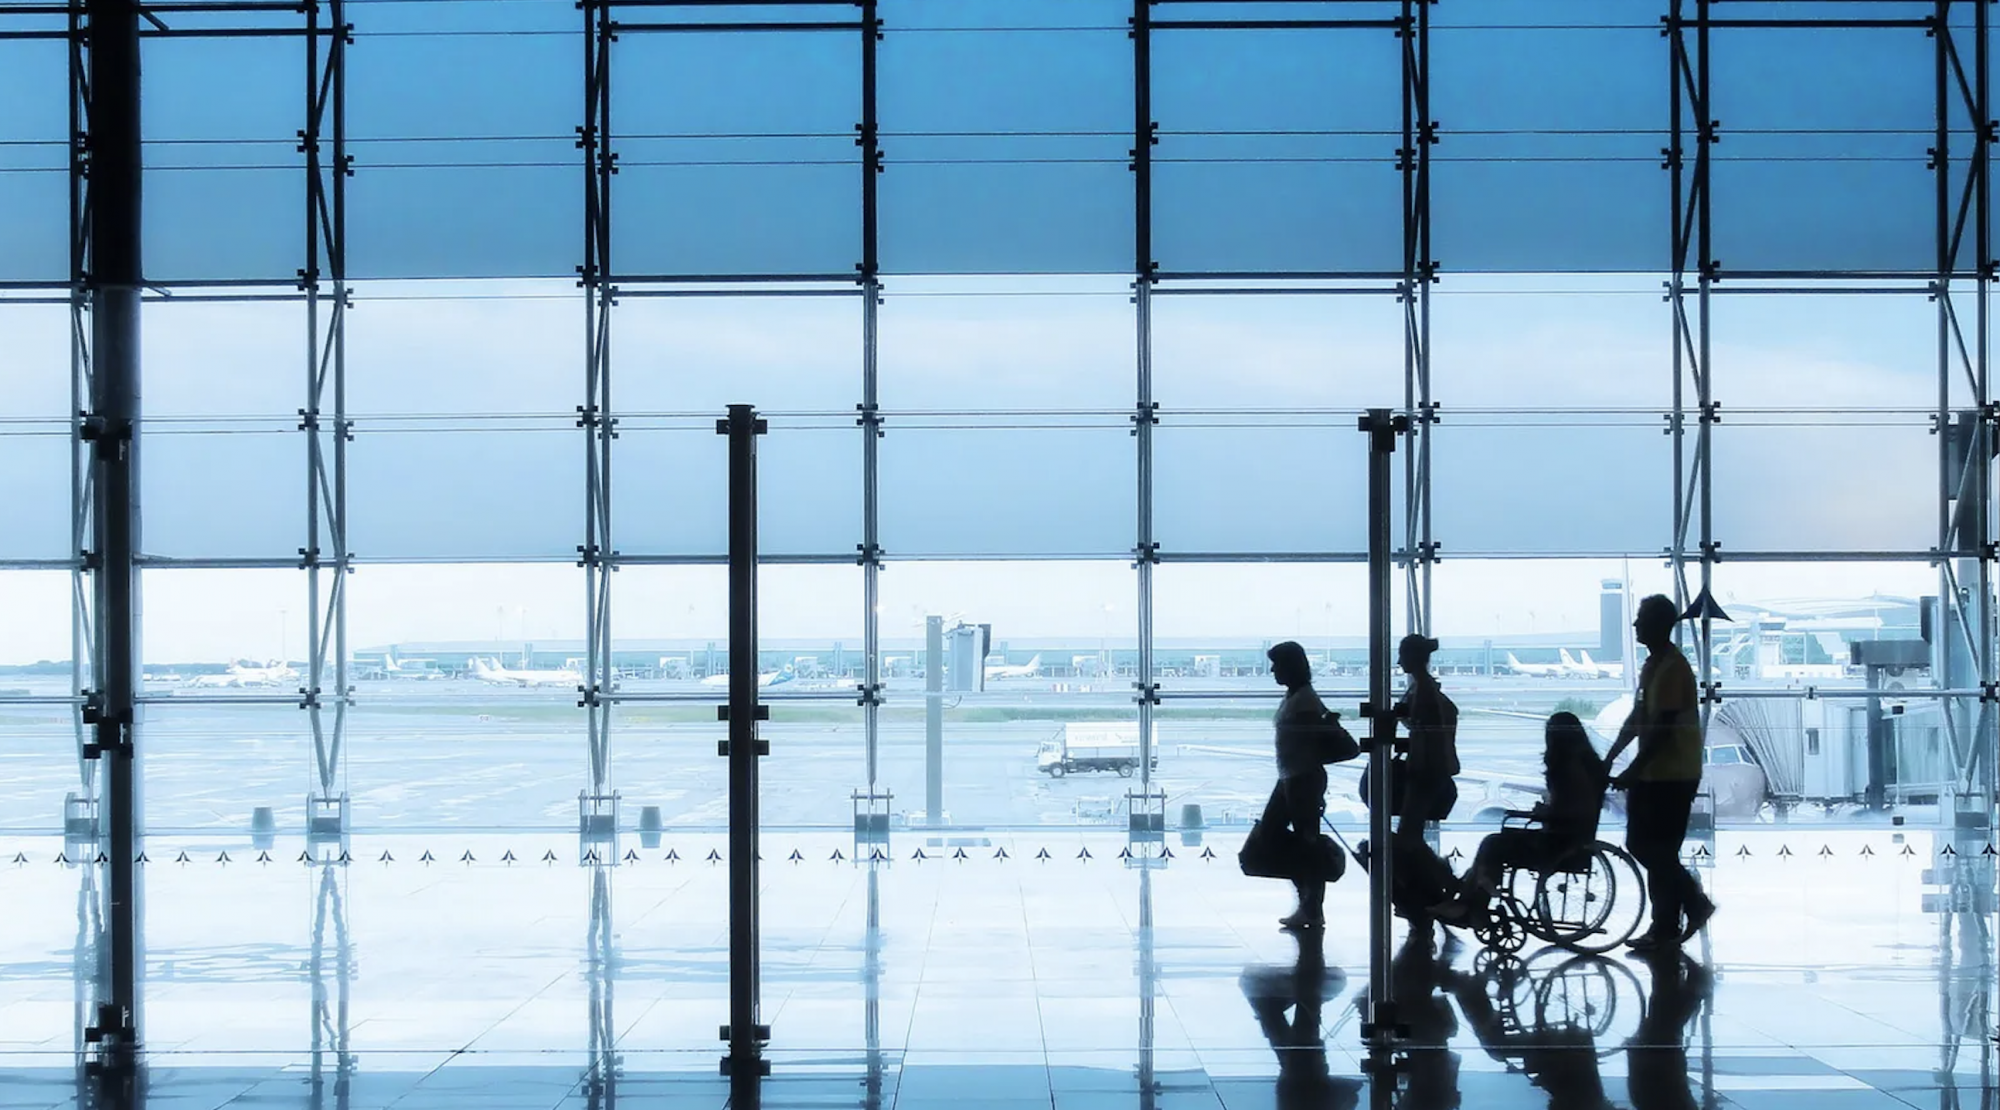 The silhouette of a small group of travellers - including a wheelchair user - move through an airport with planes and runways in the background